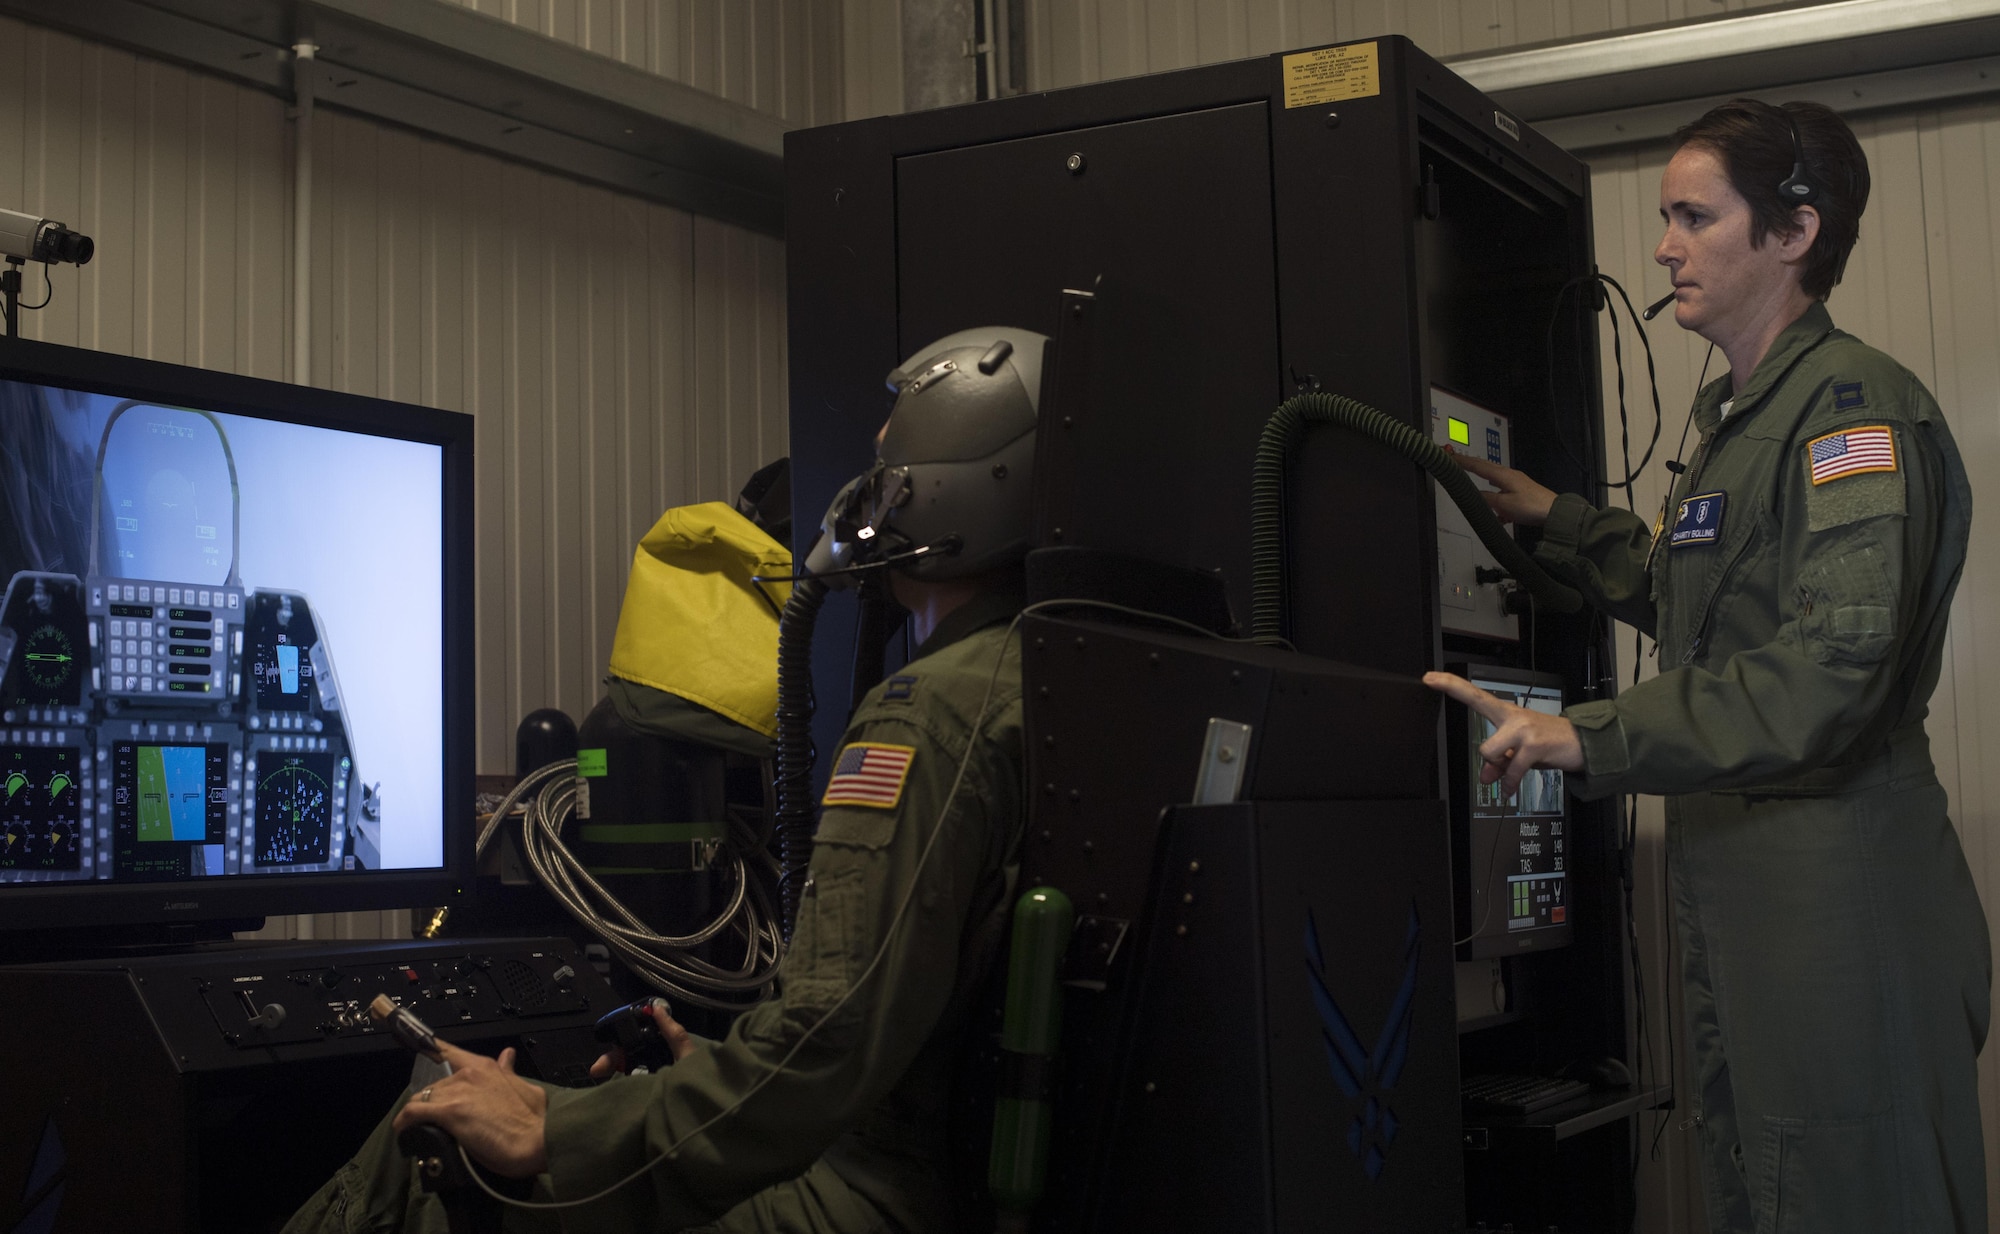 U.S. Air Force Capt. Charity Bolling, 86th Aerospace Medicine Squadron Aerospace Physiology flight chief, monitors an 86th Operations Support Squadron pilot as he flies a simulated aircraft while hooked up to a reduced oxygen breathing device on Ramstein Air Base, Germany, Sept. 13, 2017. The purpose of the ROBD is to familiarize air crew personnel with effects of hypoxia, the lack of oxygen at high altitudes, and teach them how to mitigate the symptoms. (U.S. Air Force photo by Senior Airman Tryphena Mayhugh)